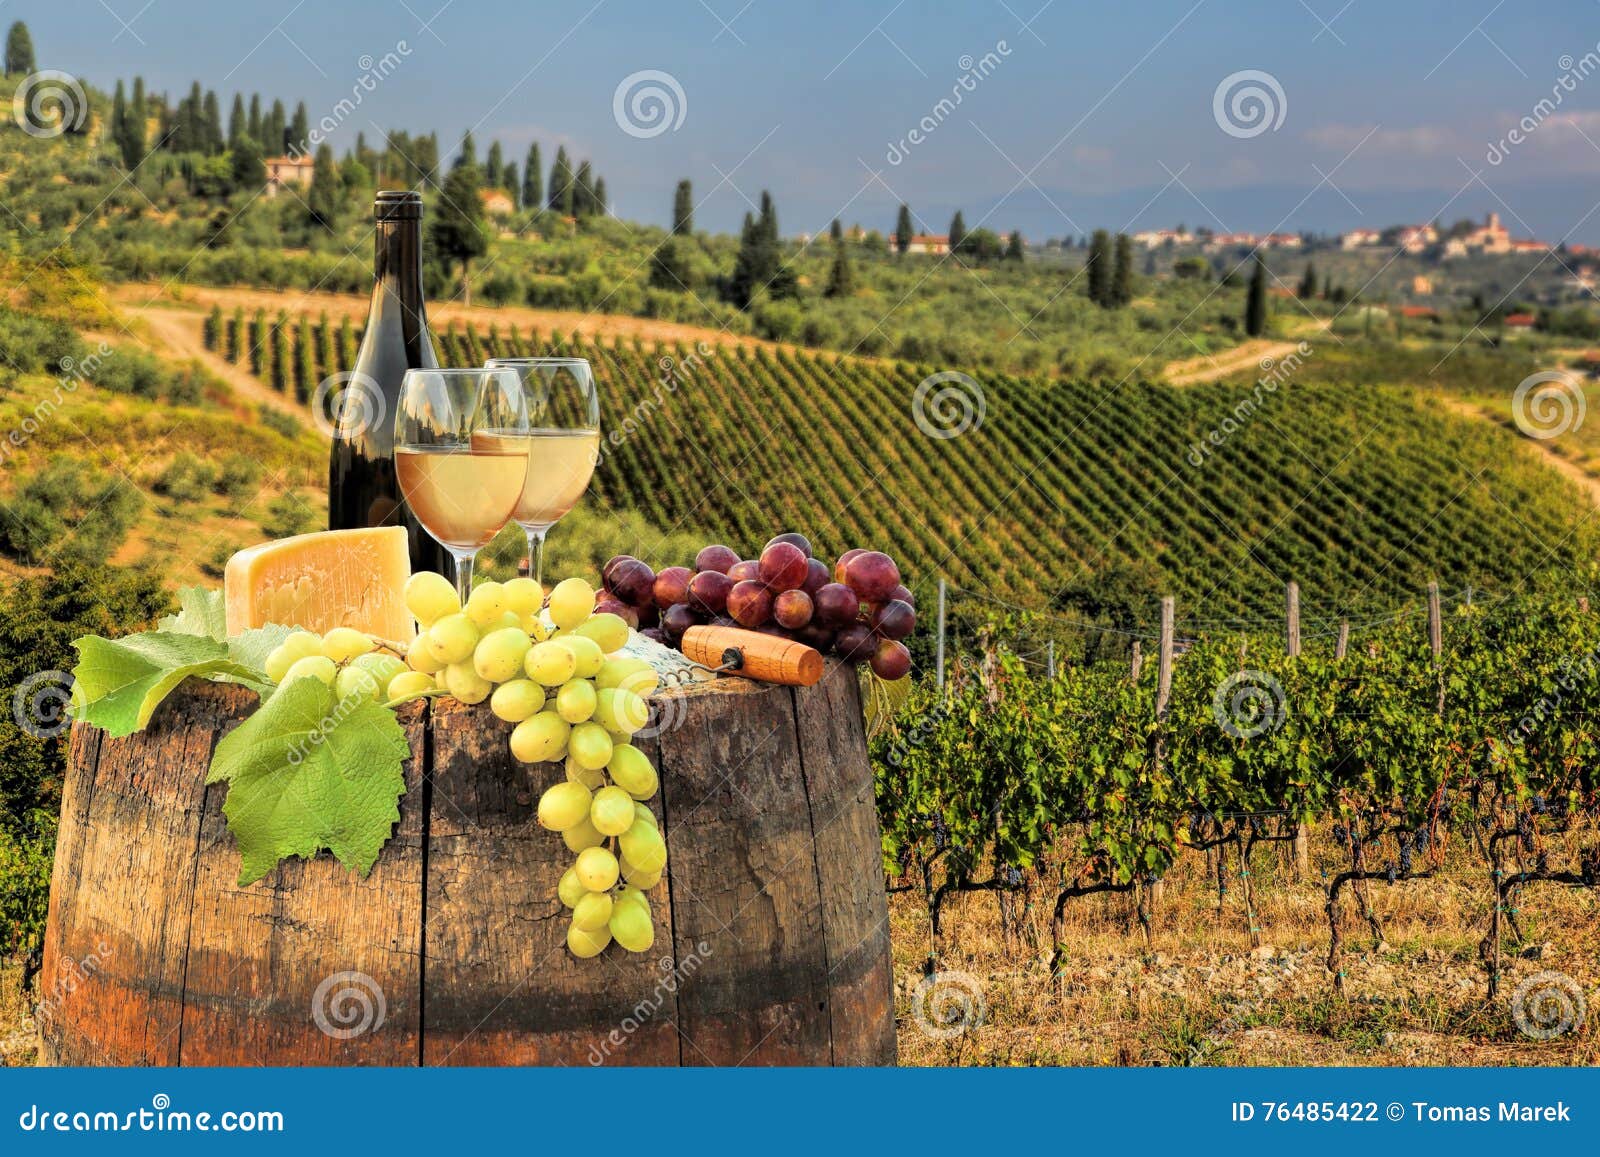 White Wine with Cask on Vineyard at Sunset in Chianti Tuscany Italy Small Size Apple Green Lunarable Winery Cutting Board Decorative Tempered Glass Cutting and Serving Board